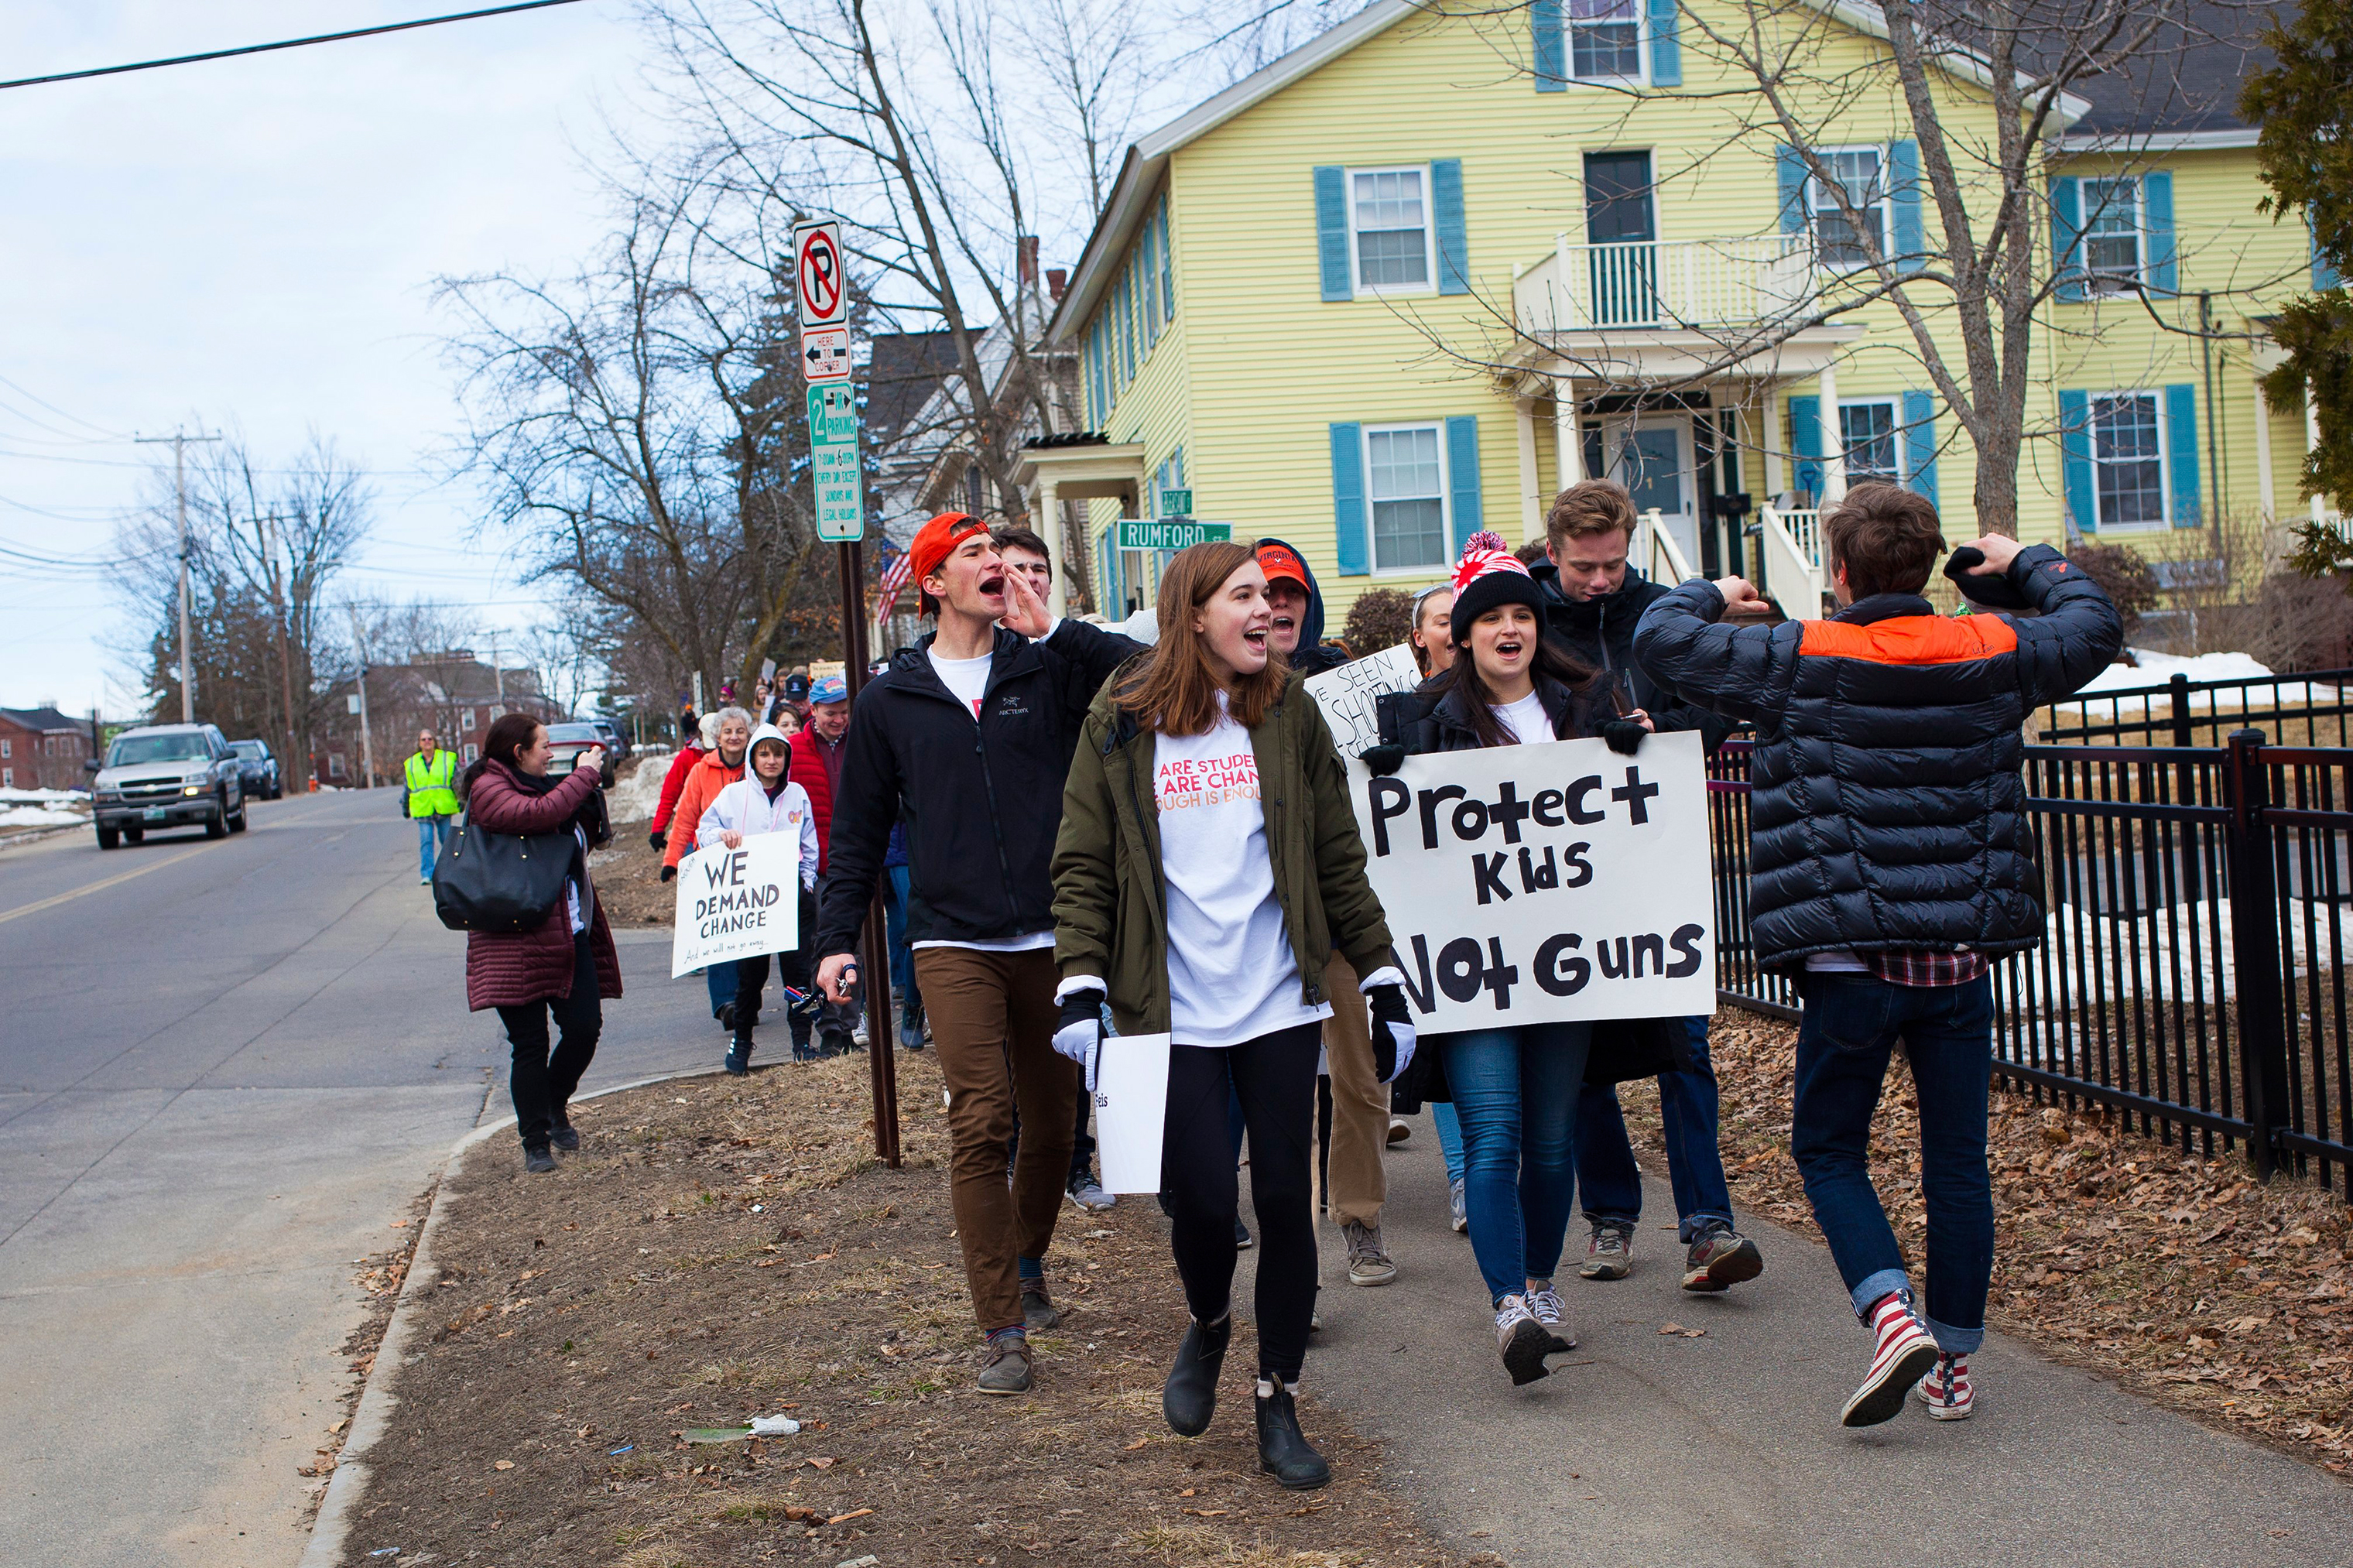 Protesters march to the State House in downtown Concord. (Elizabeth Frantz—The Concord Monitor/AP)